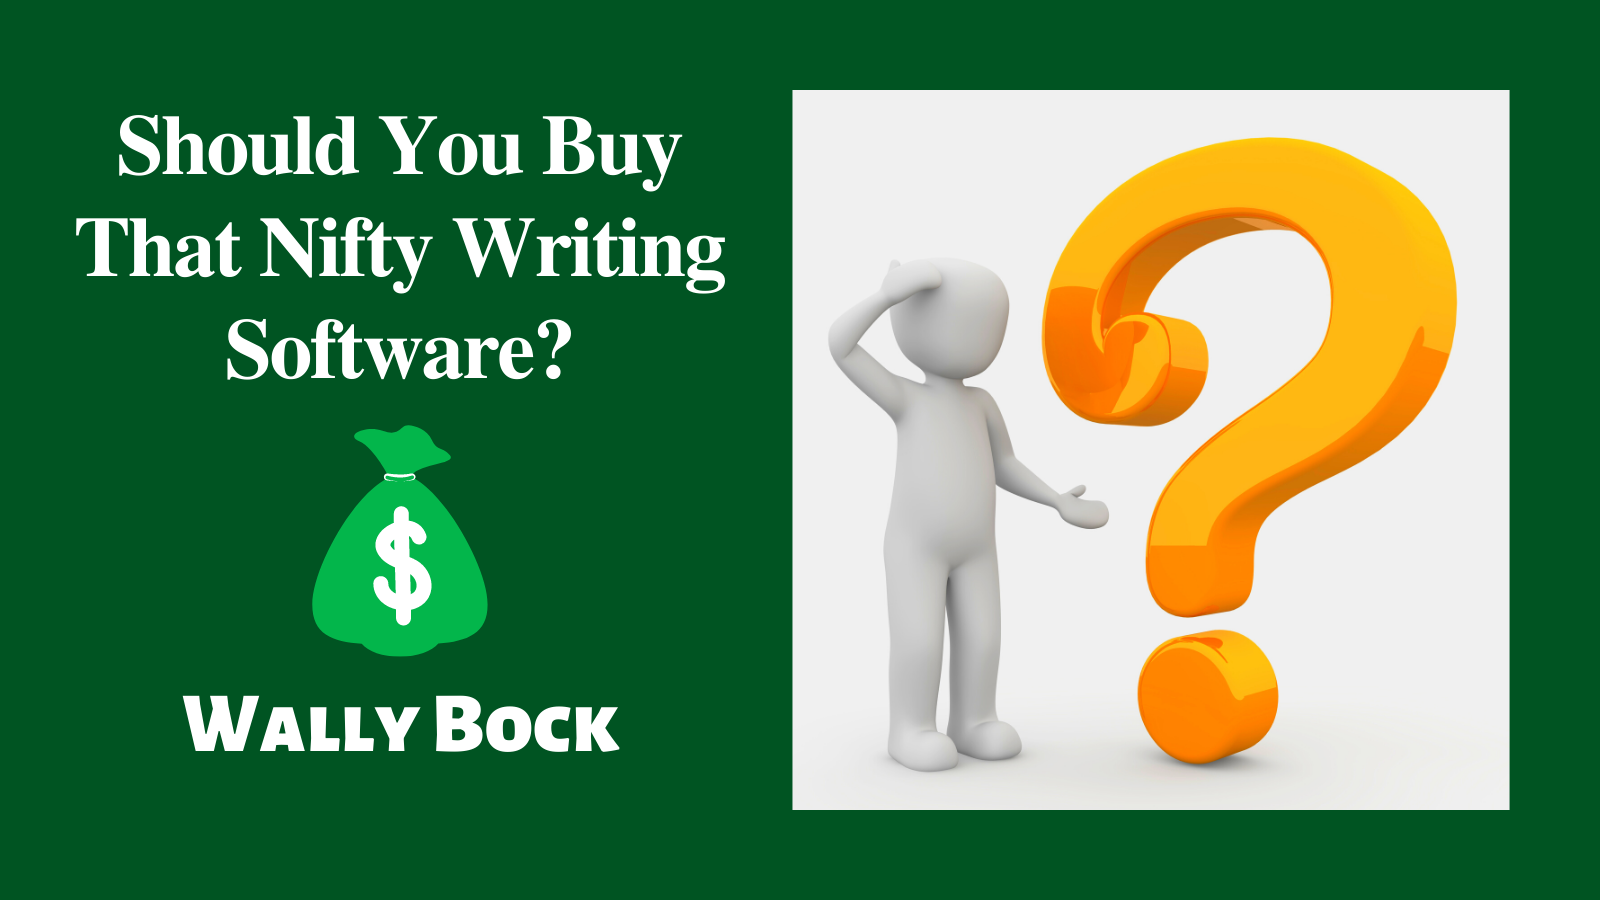 Should you buy that nifty writing software?